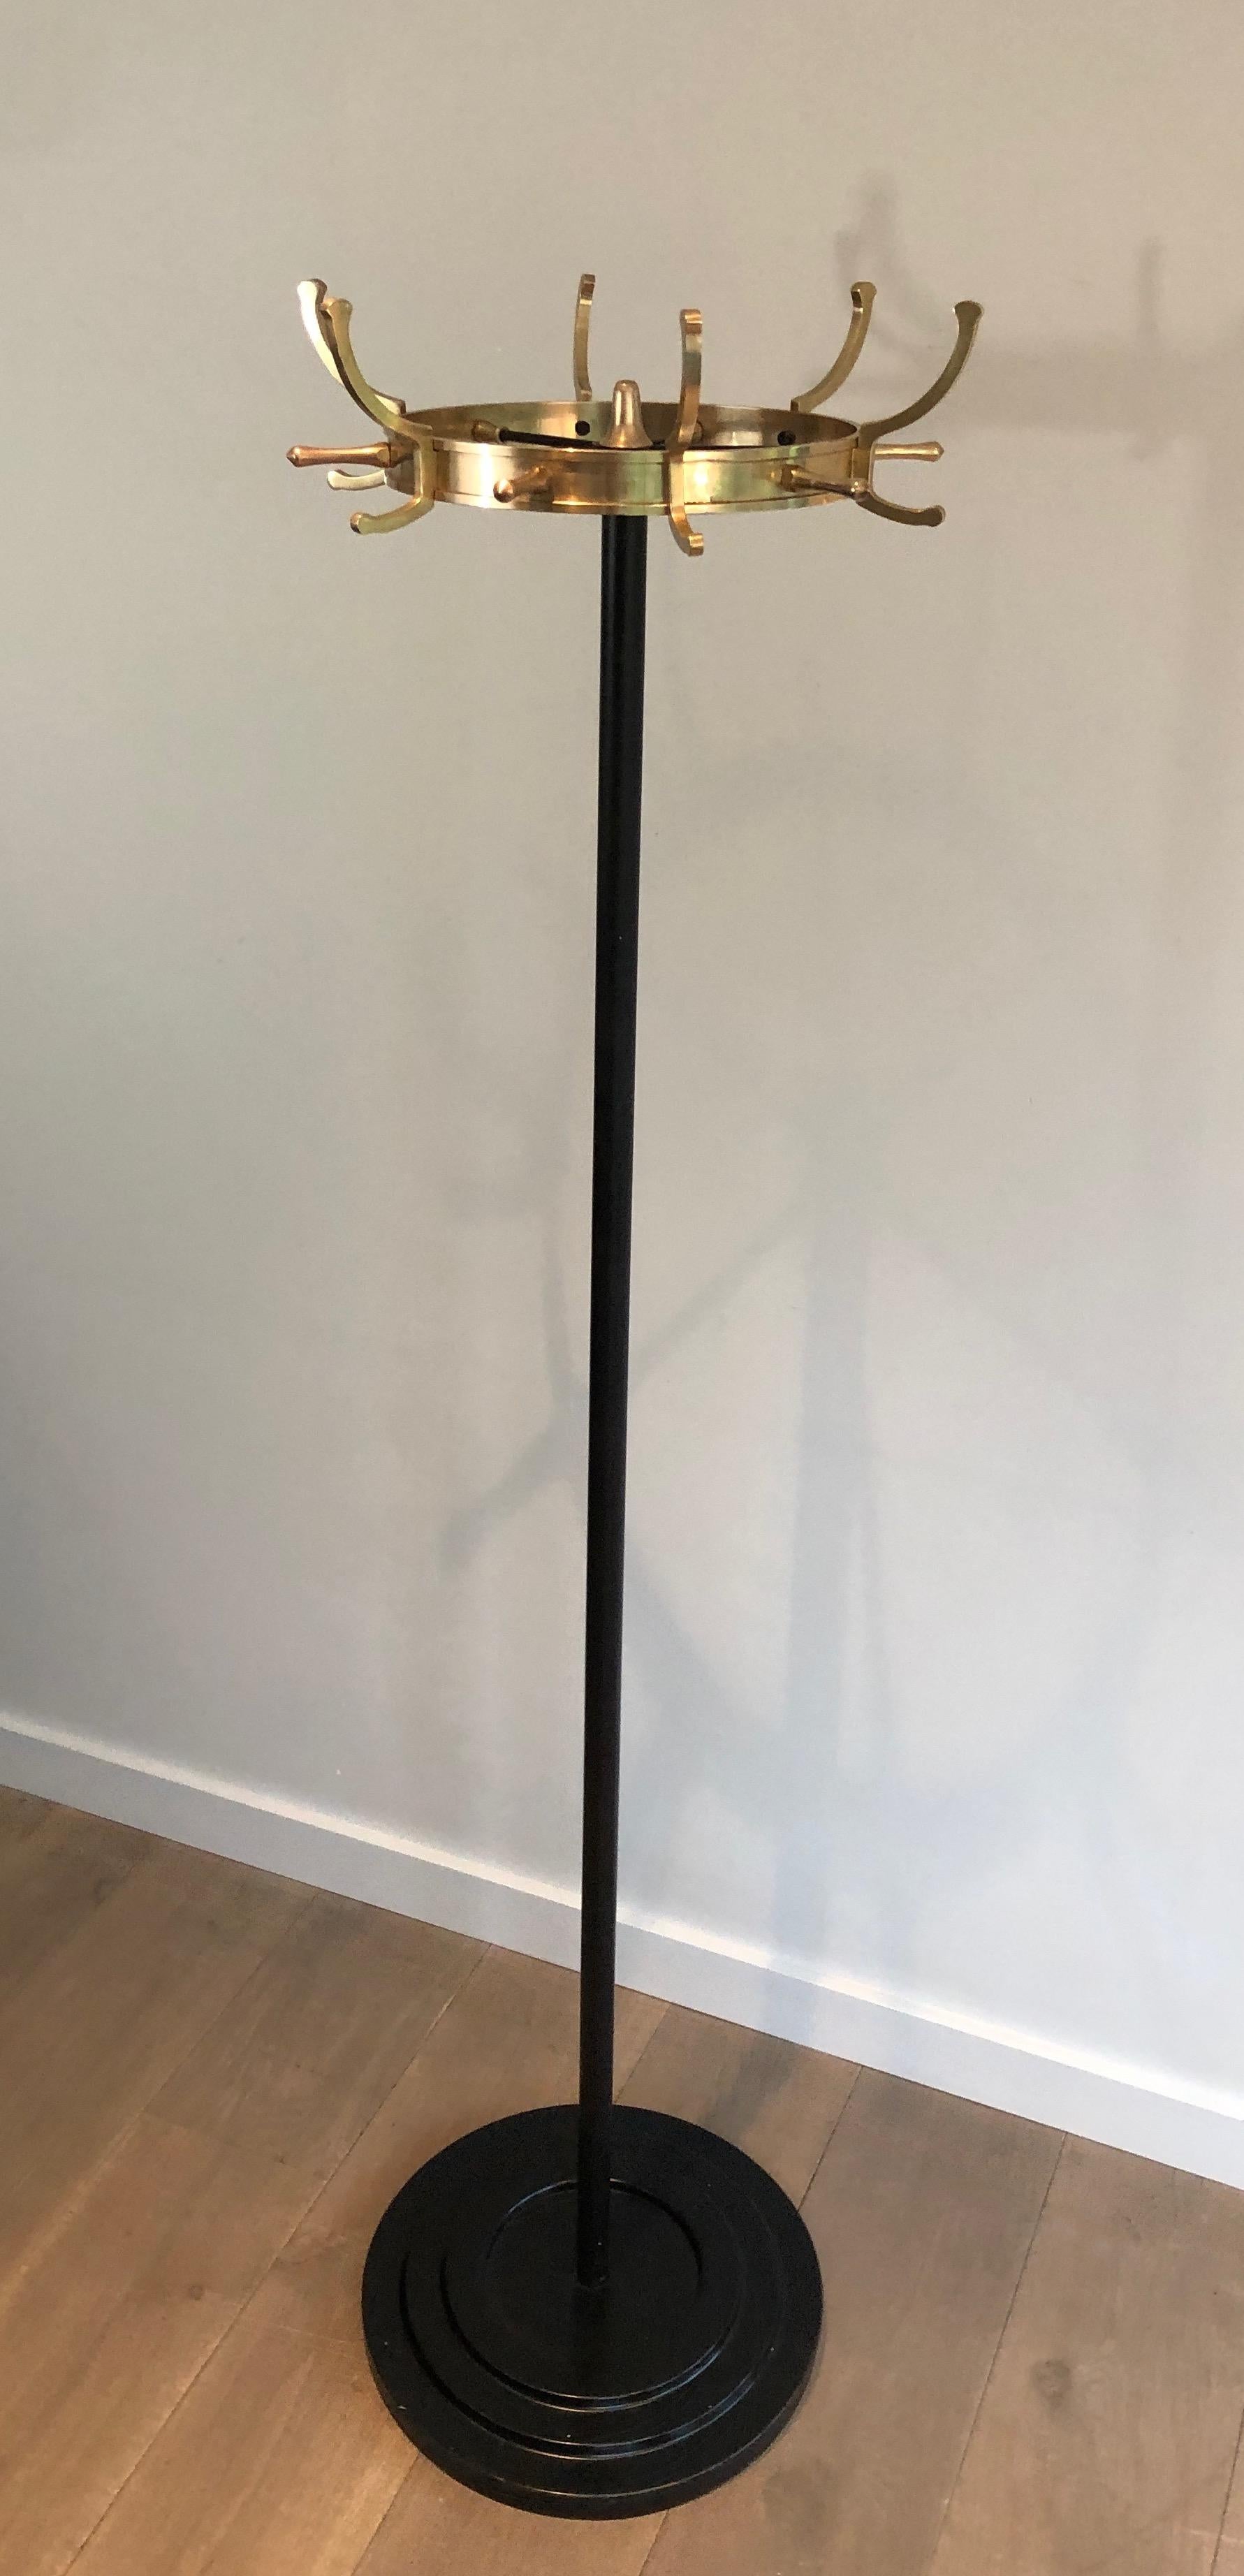 This coat rack is made of black lacquered metal and brass. This is a French work by famous designer Jacques Adnet. Circa 1950.